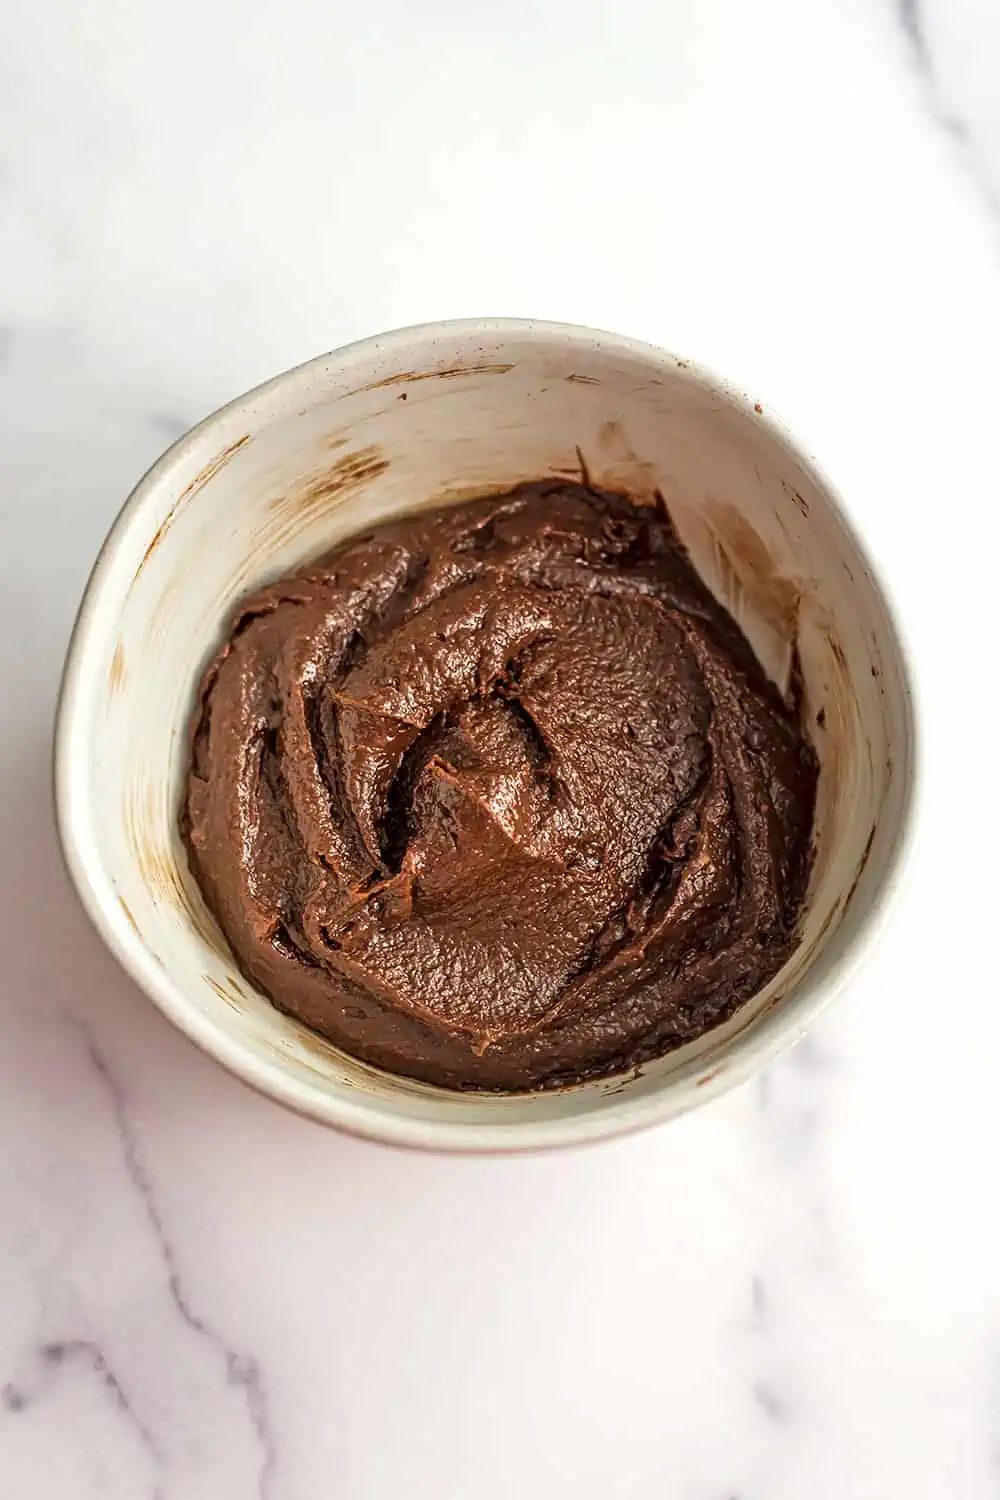 Chocolate tahini spread in a bowl after mixing.